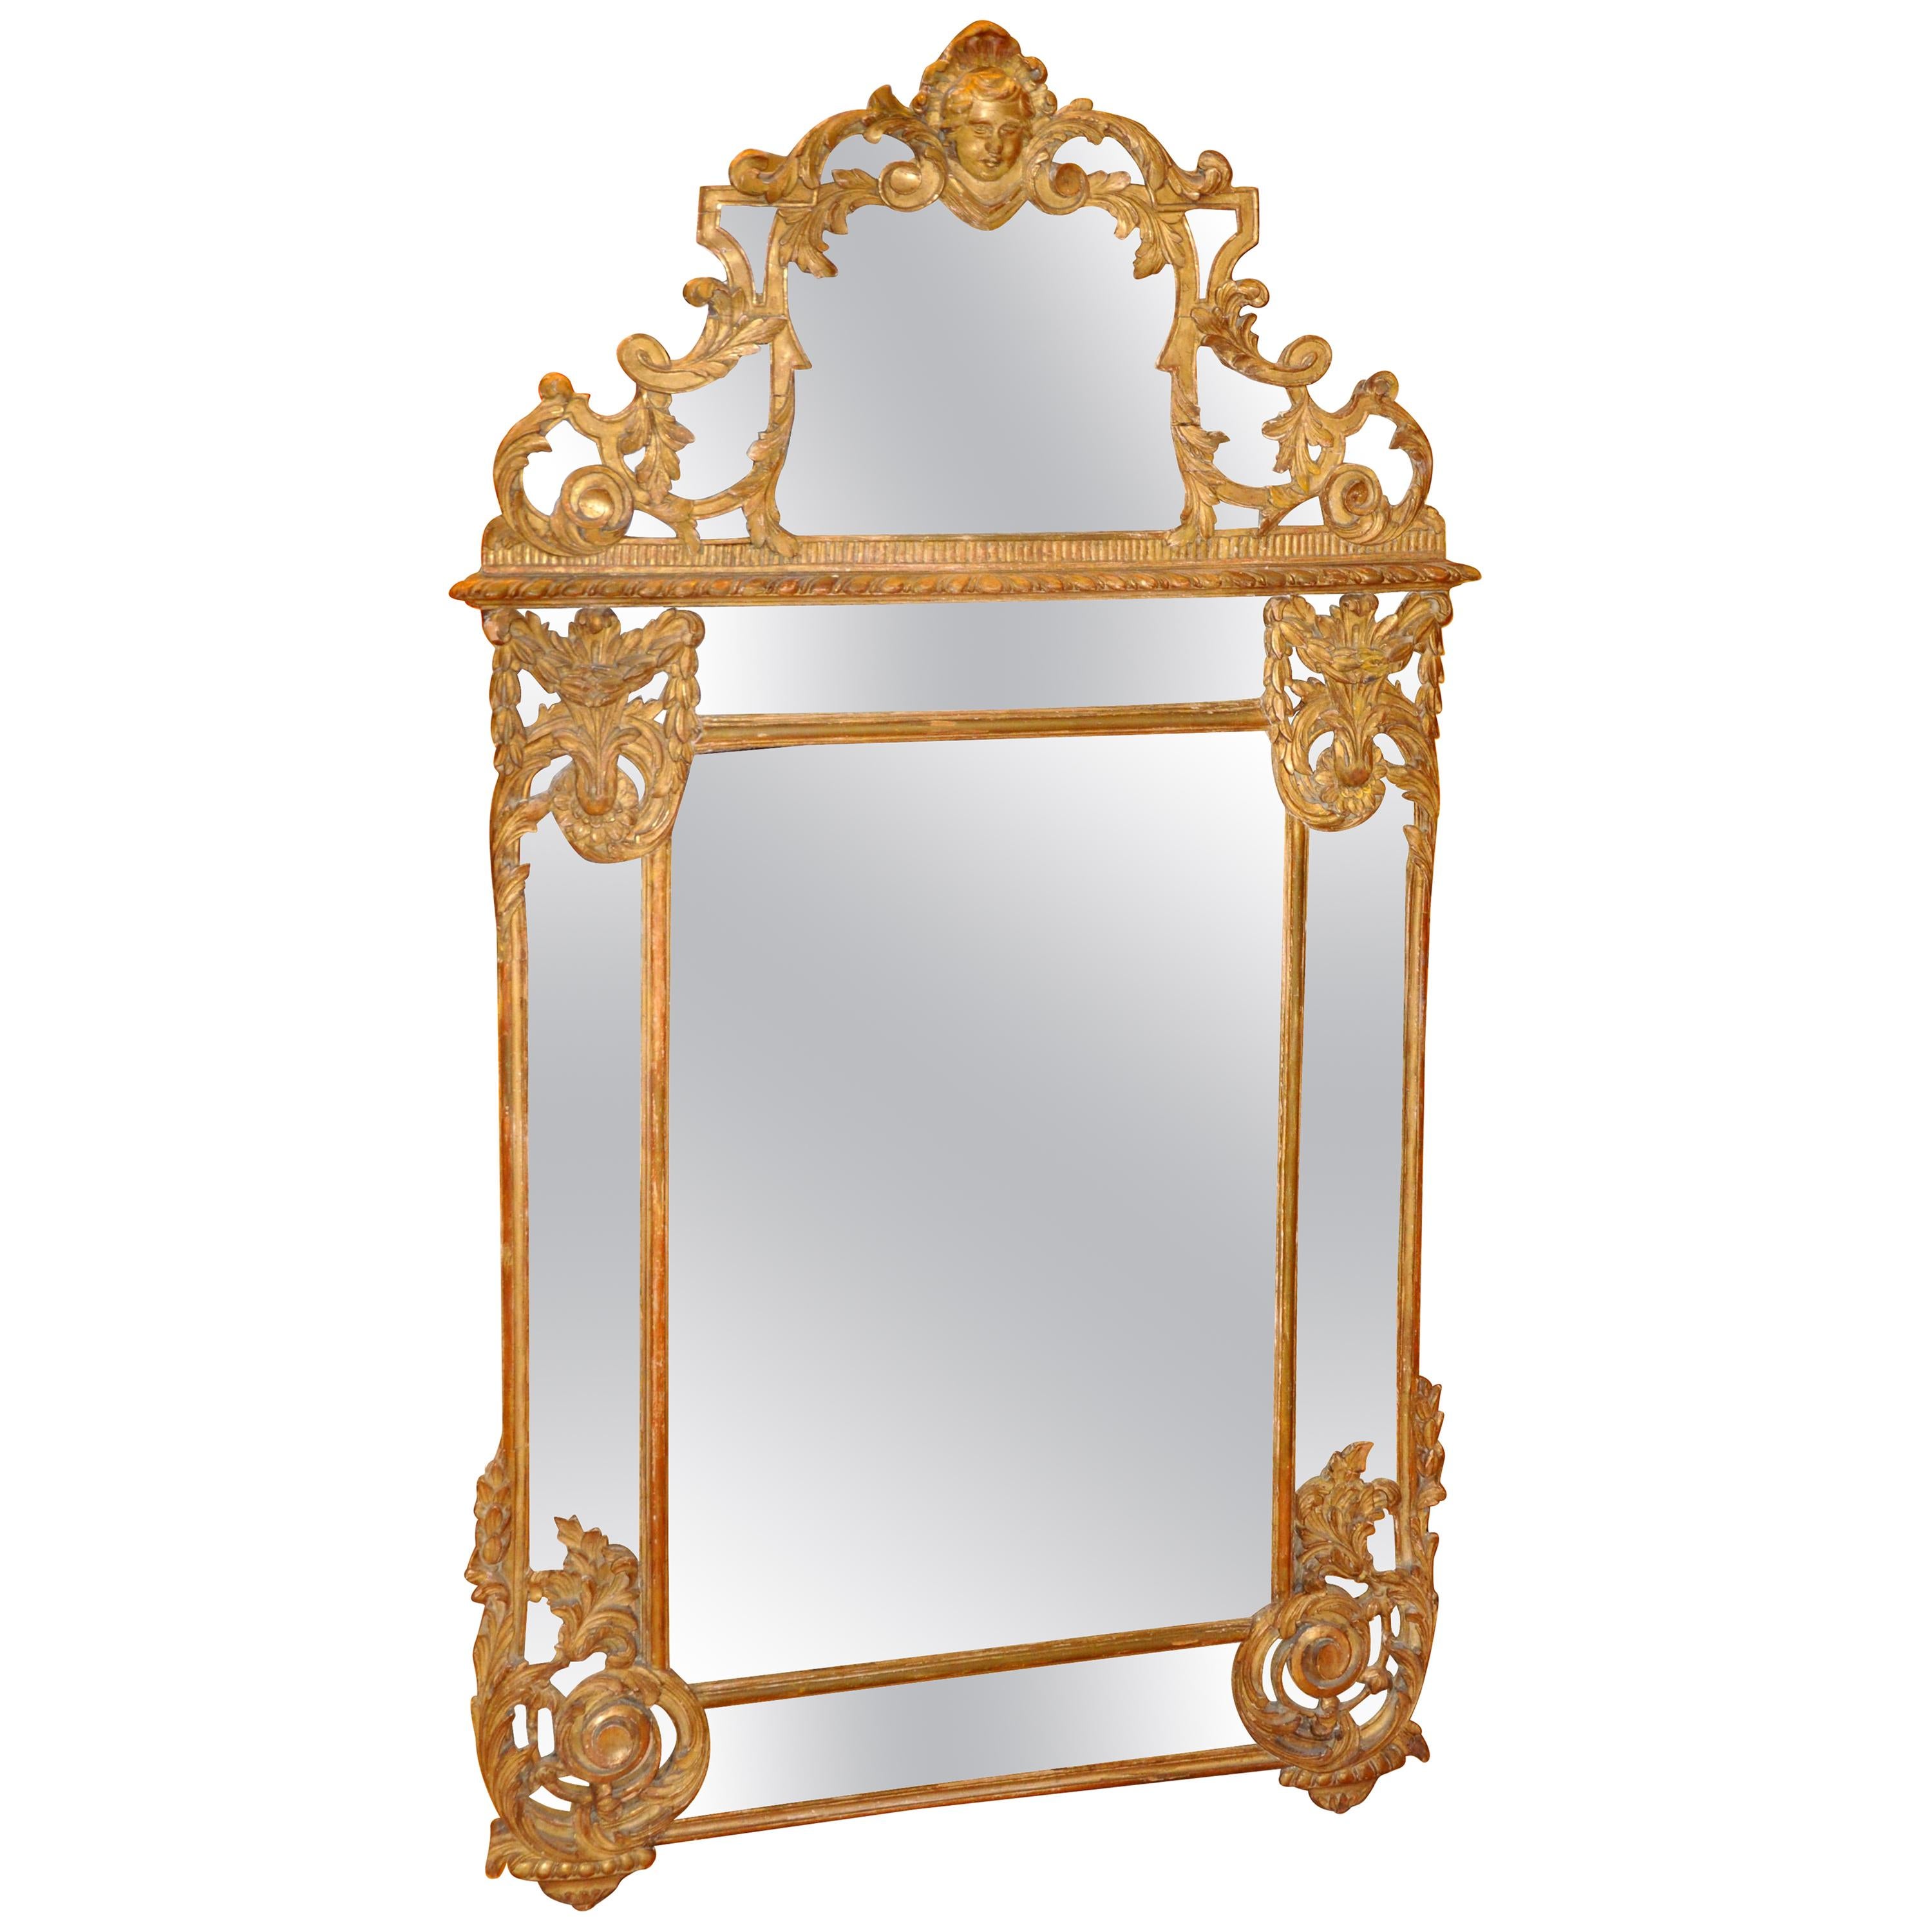 19th Century French Giltwood Regence Style Mirror